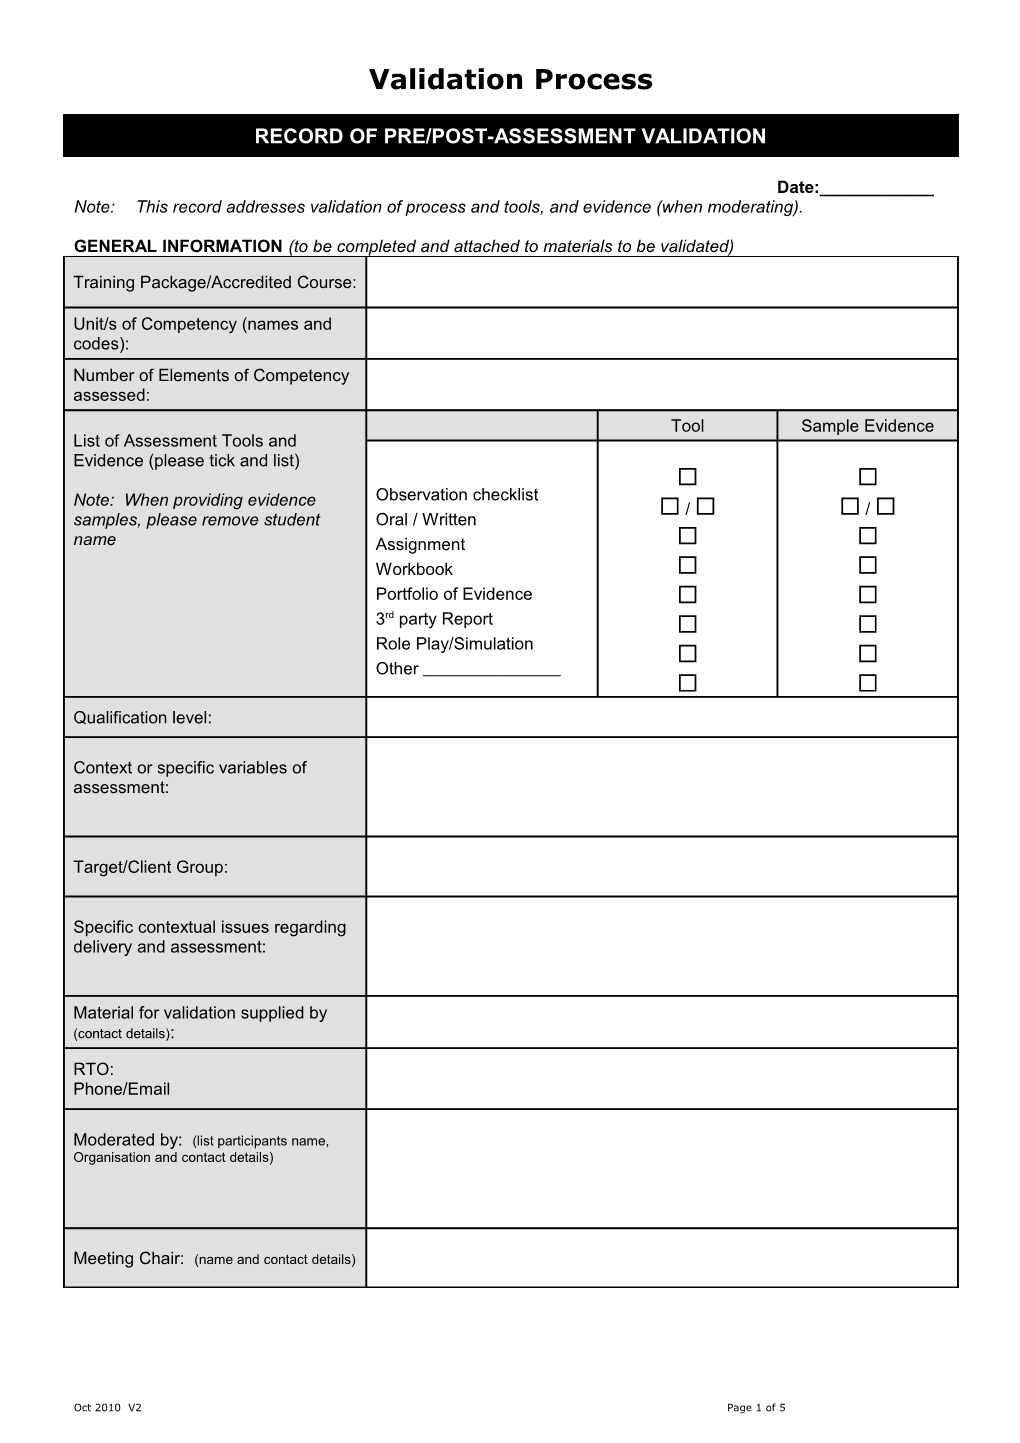 Record of Validation of Assessment Strategy